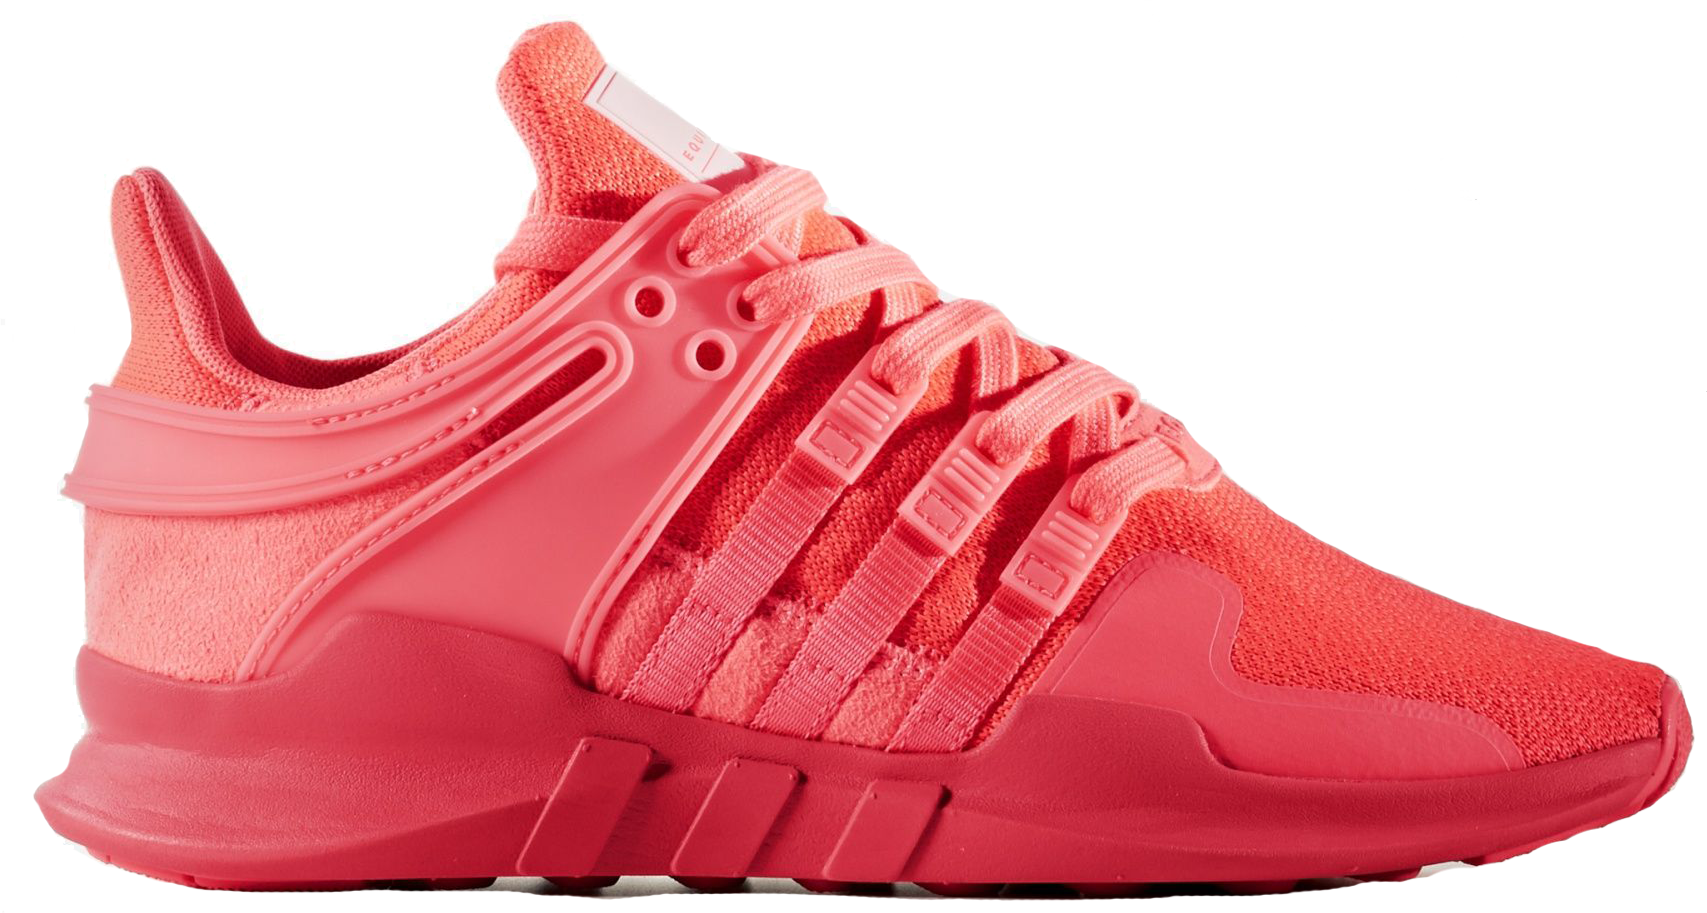 eqt support adv womens shoes